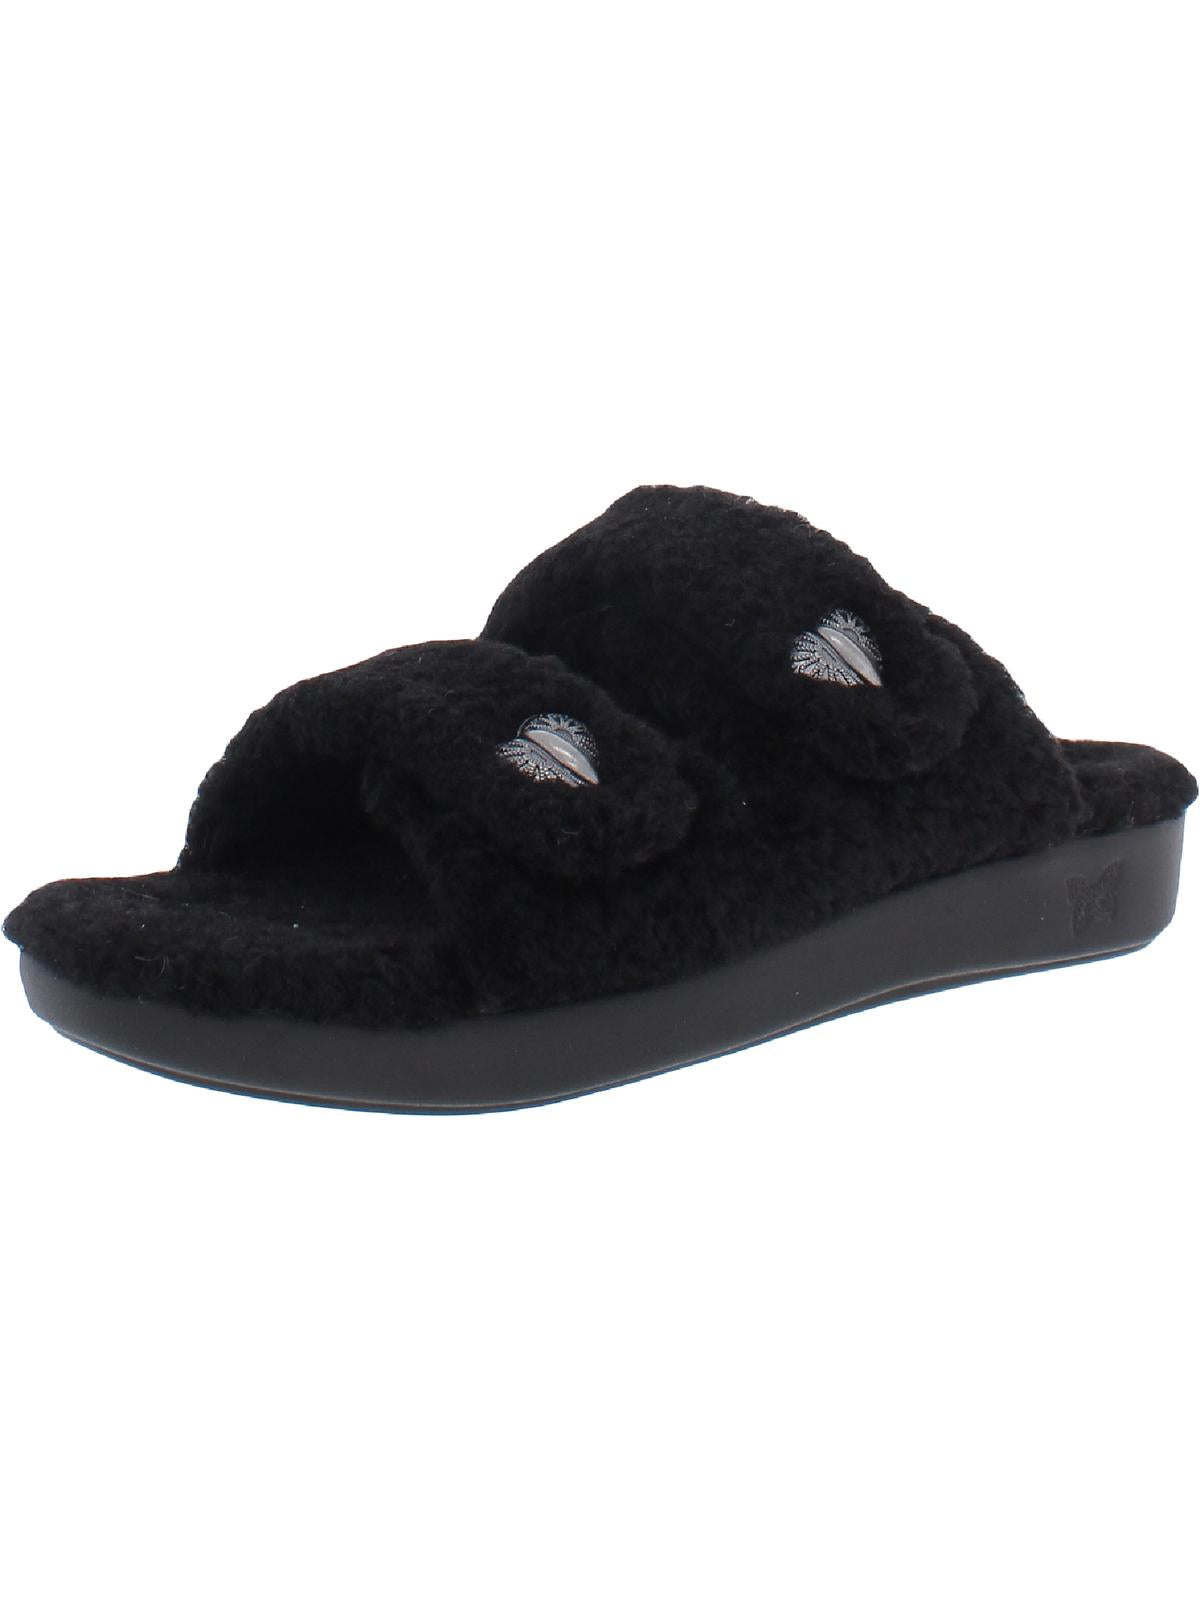 Alegria Chillery Womens Faux Fur Adjustable Slide Slippers In Black